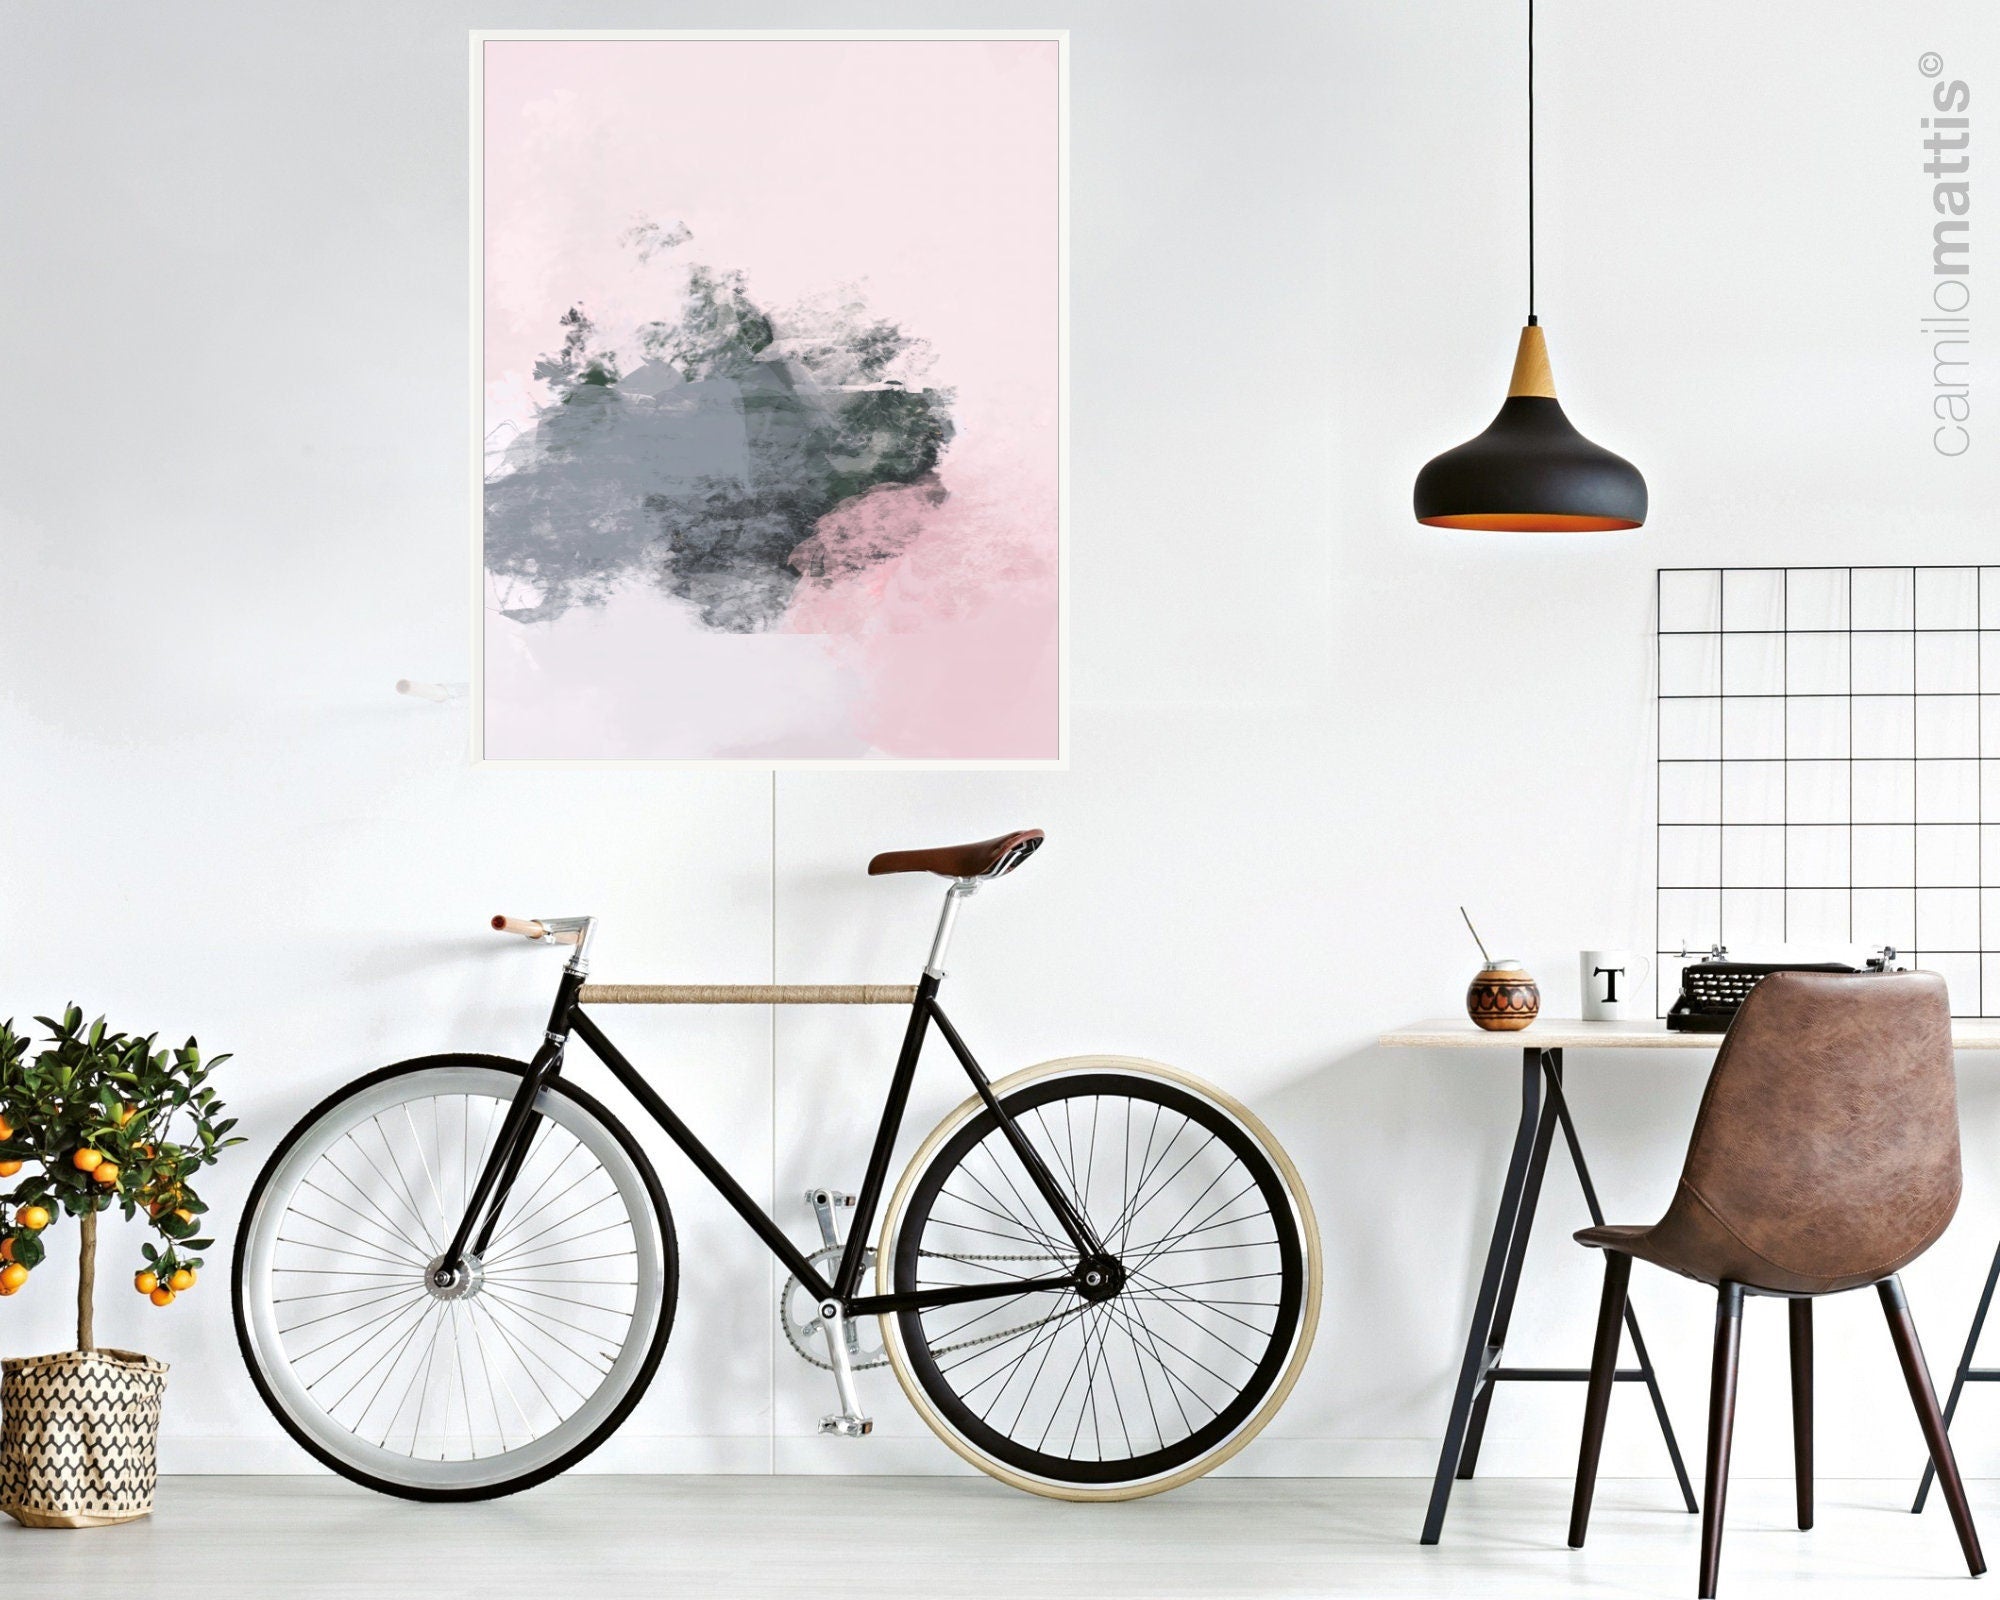 Blush pink and grey brush strokes extra large wall art 24x36 art prints, Comfort colors apartment decor